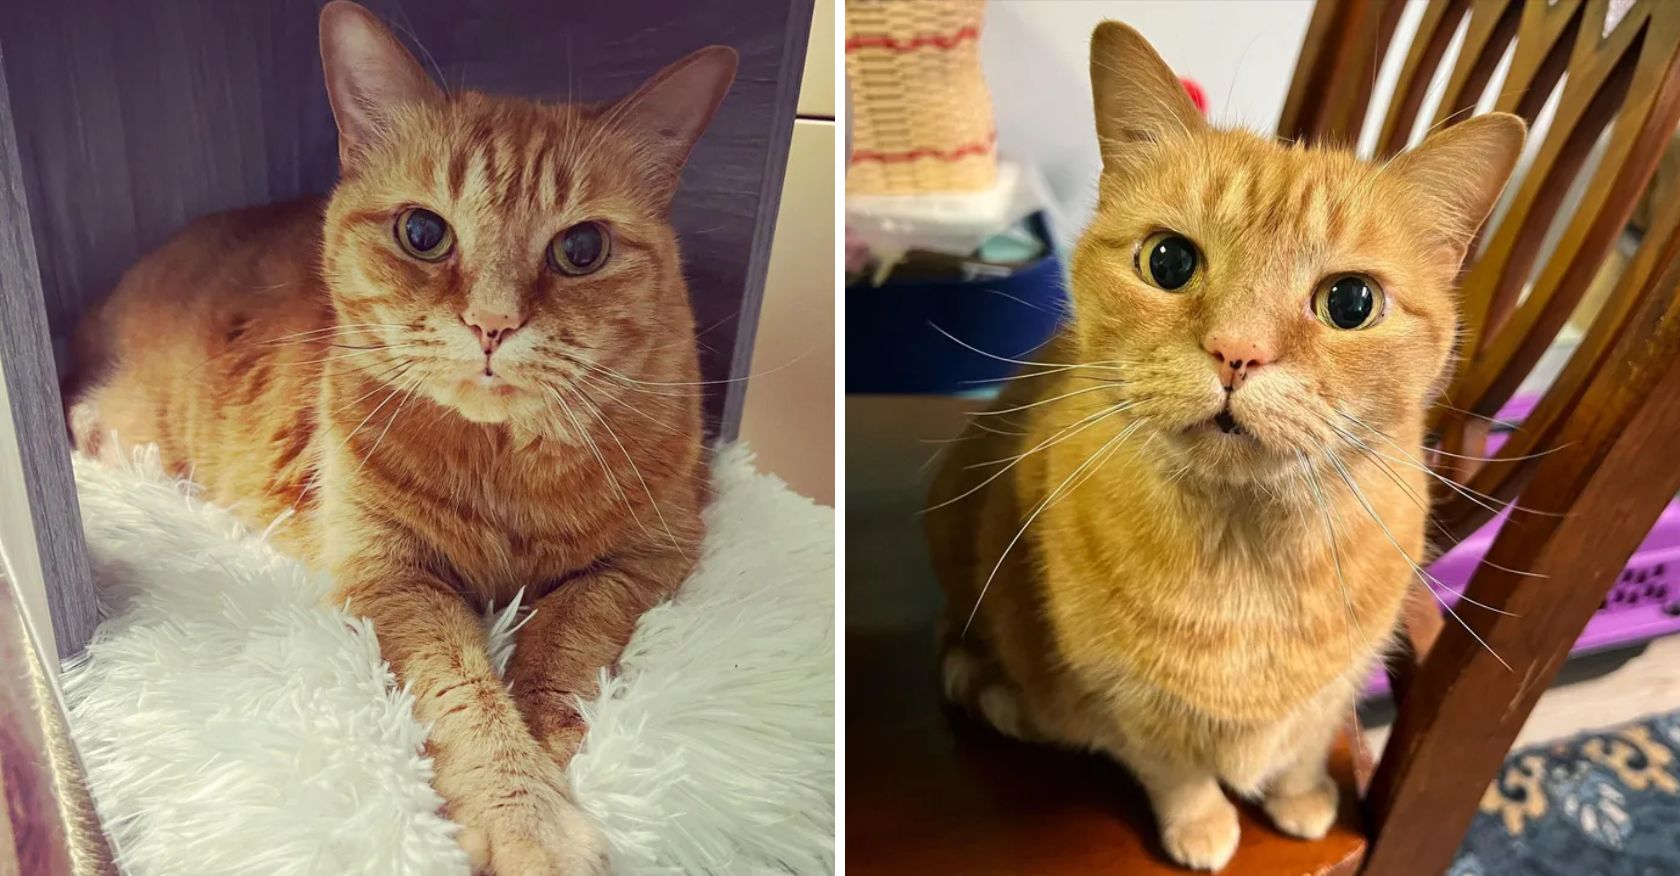 After a year of relentless efforts, an 11-year-old cat finally FOUND A LOVING FAMILY that welcomed them with open arms